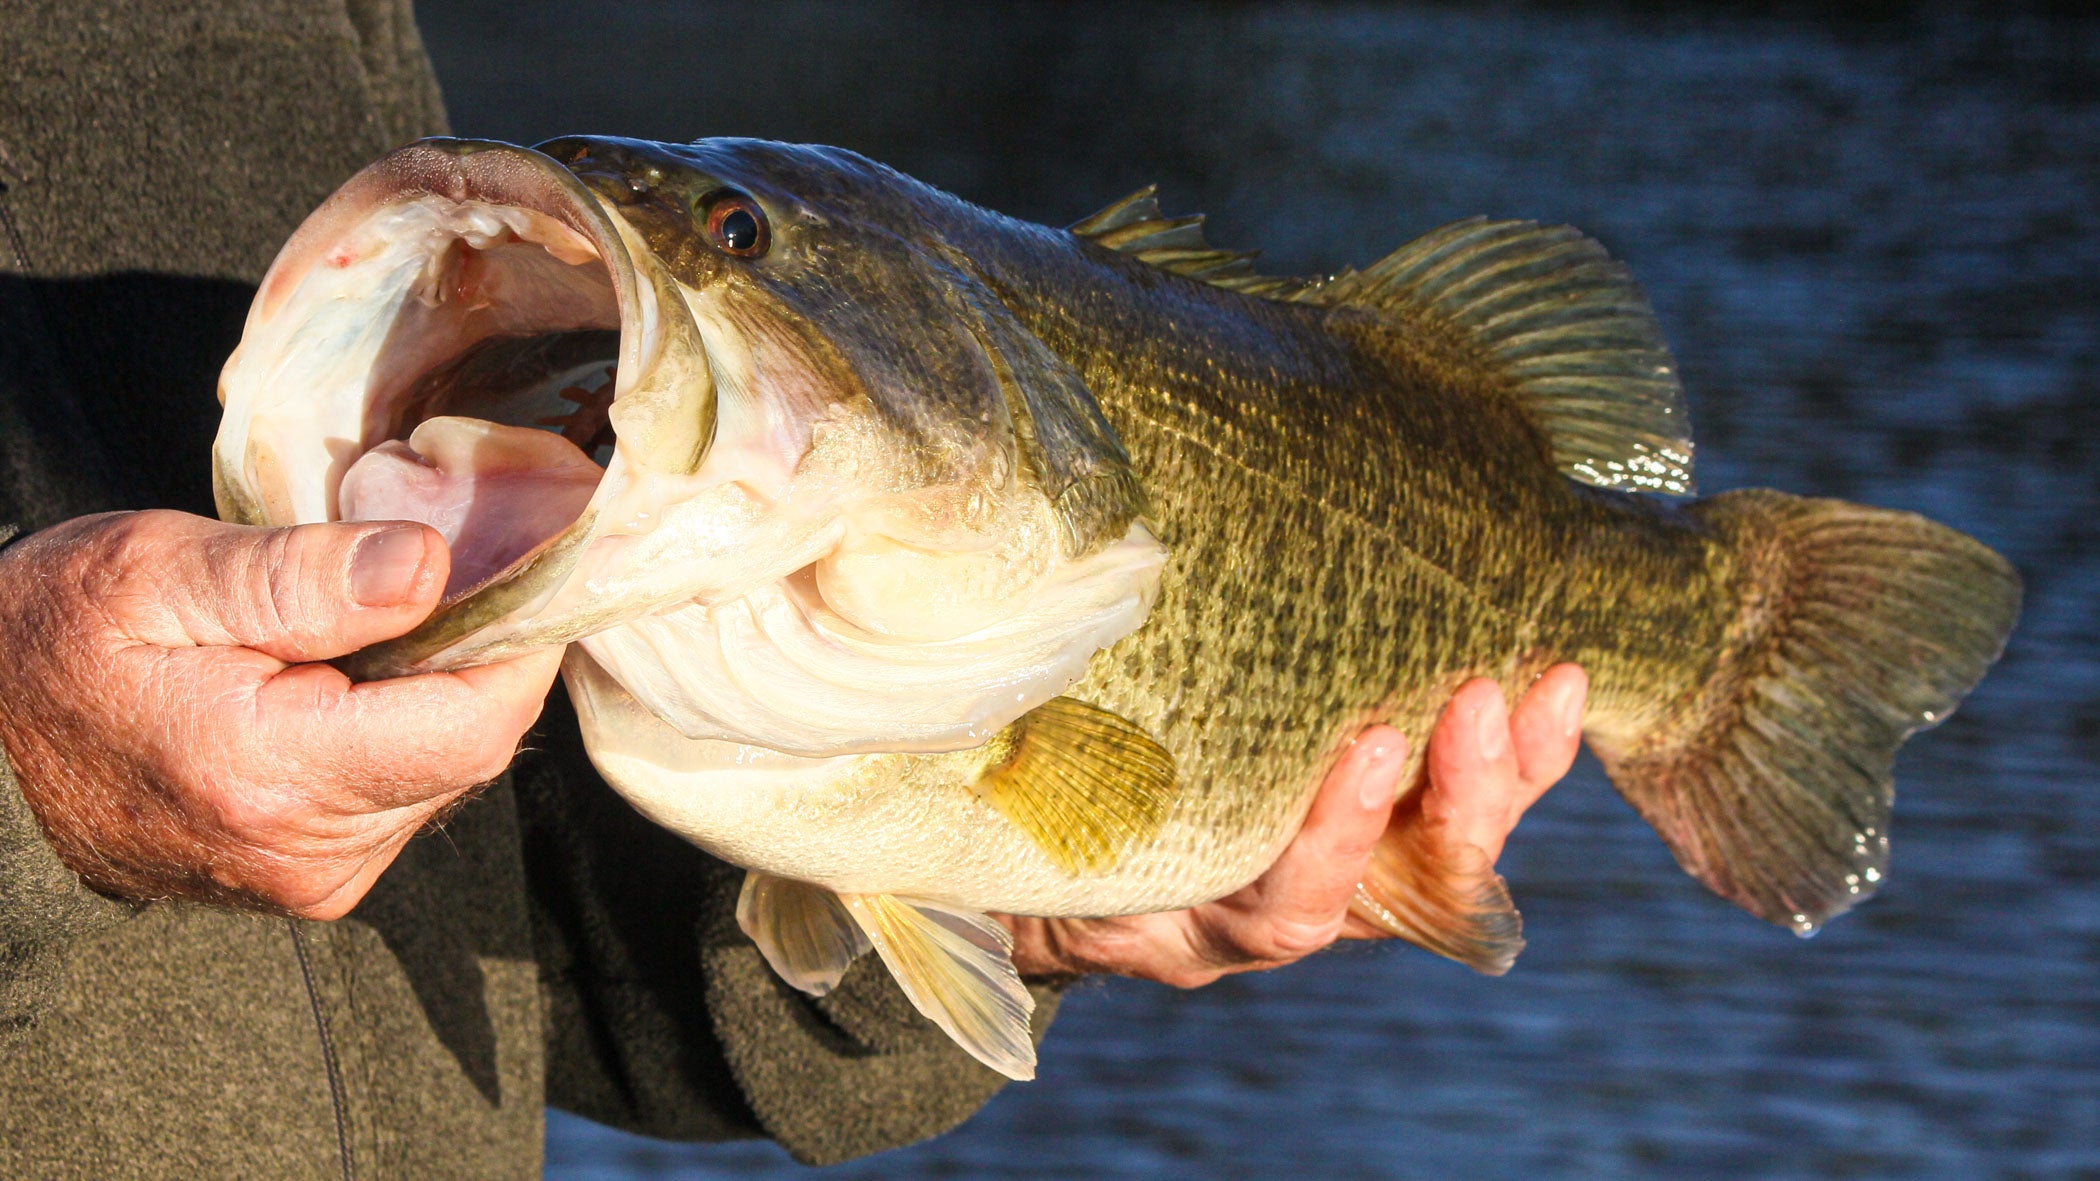 Chatterbait lures catch big largemouth bass